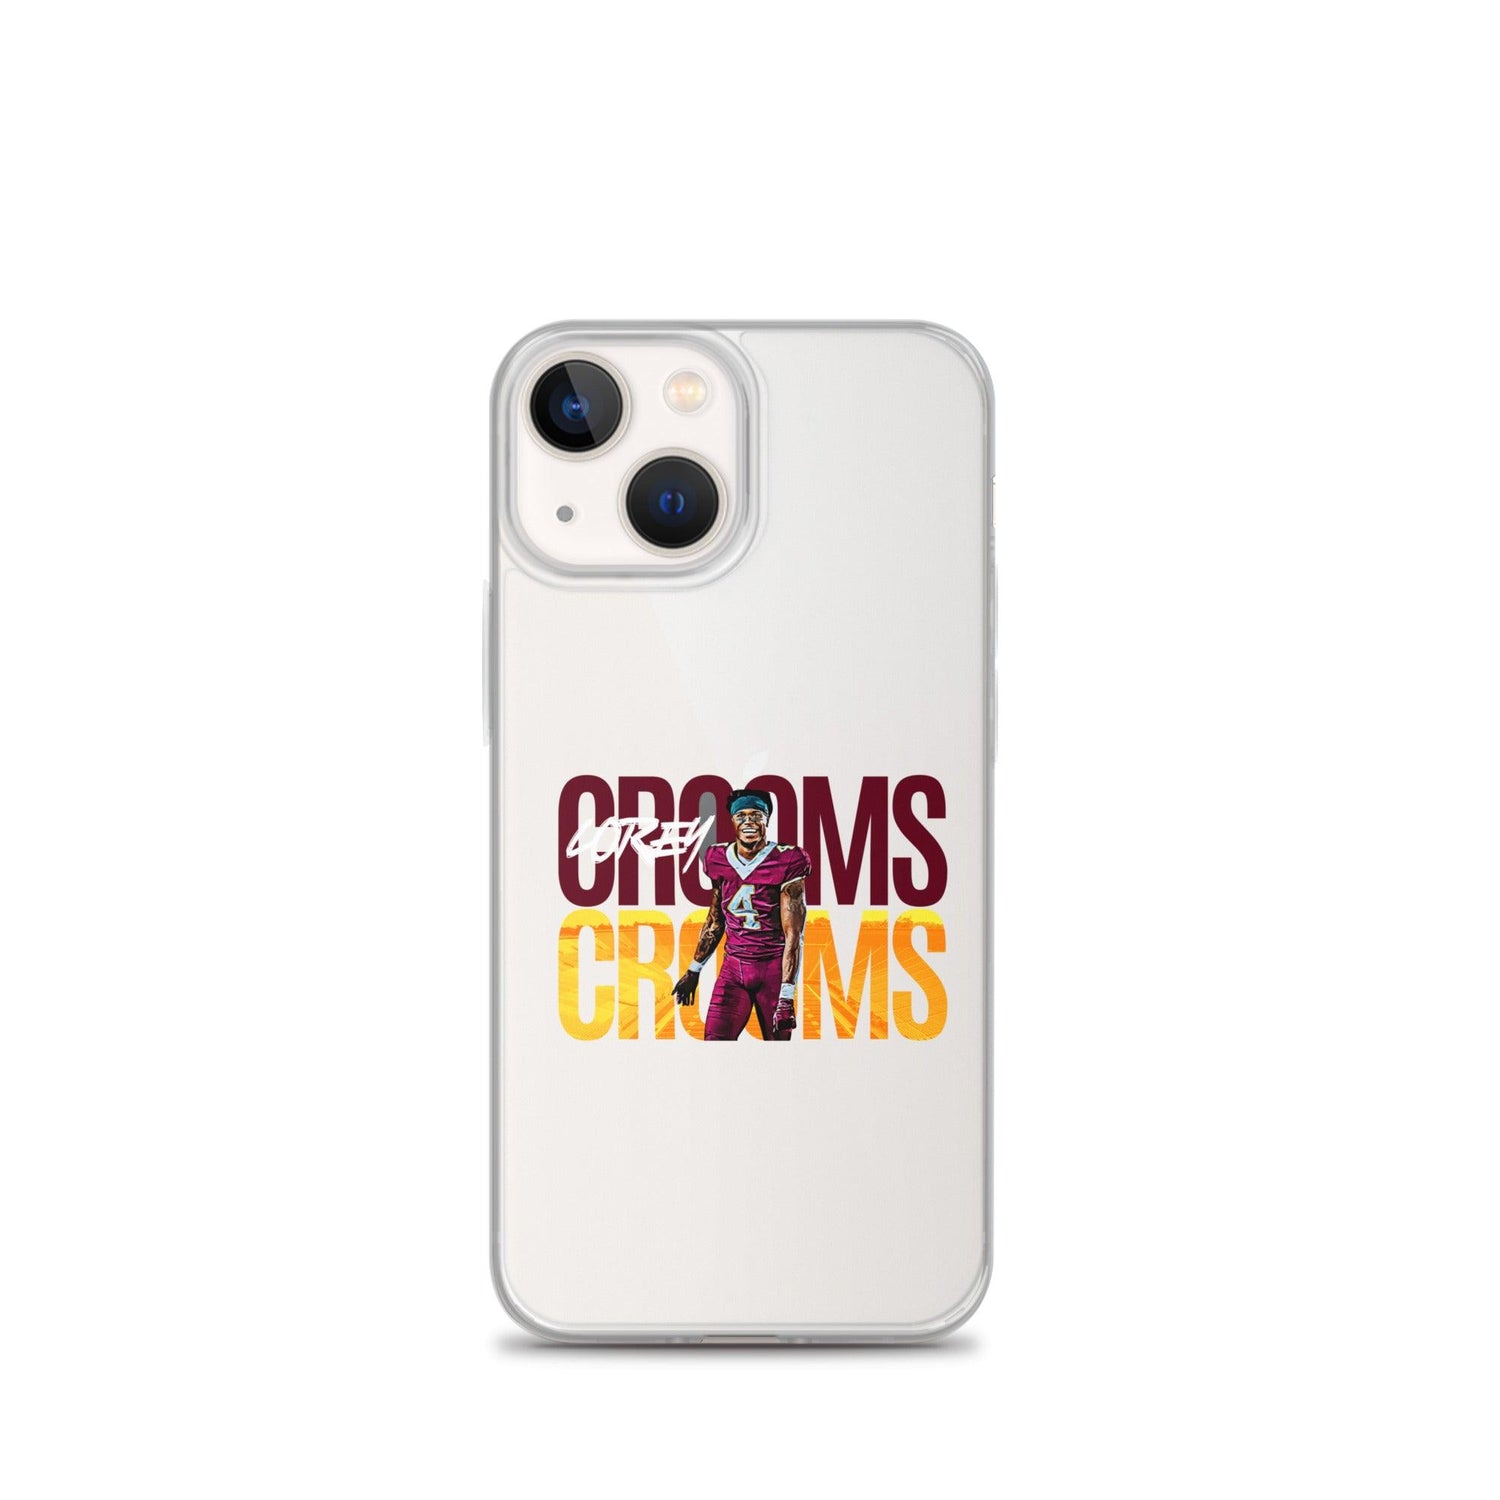 Corey Crooms "Gameday" iPhone® - Fan Arch